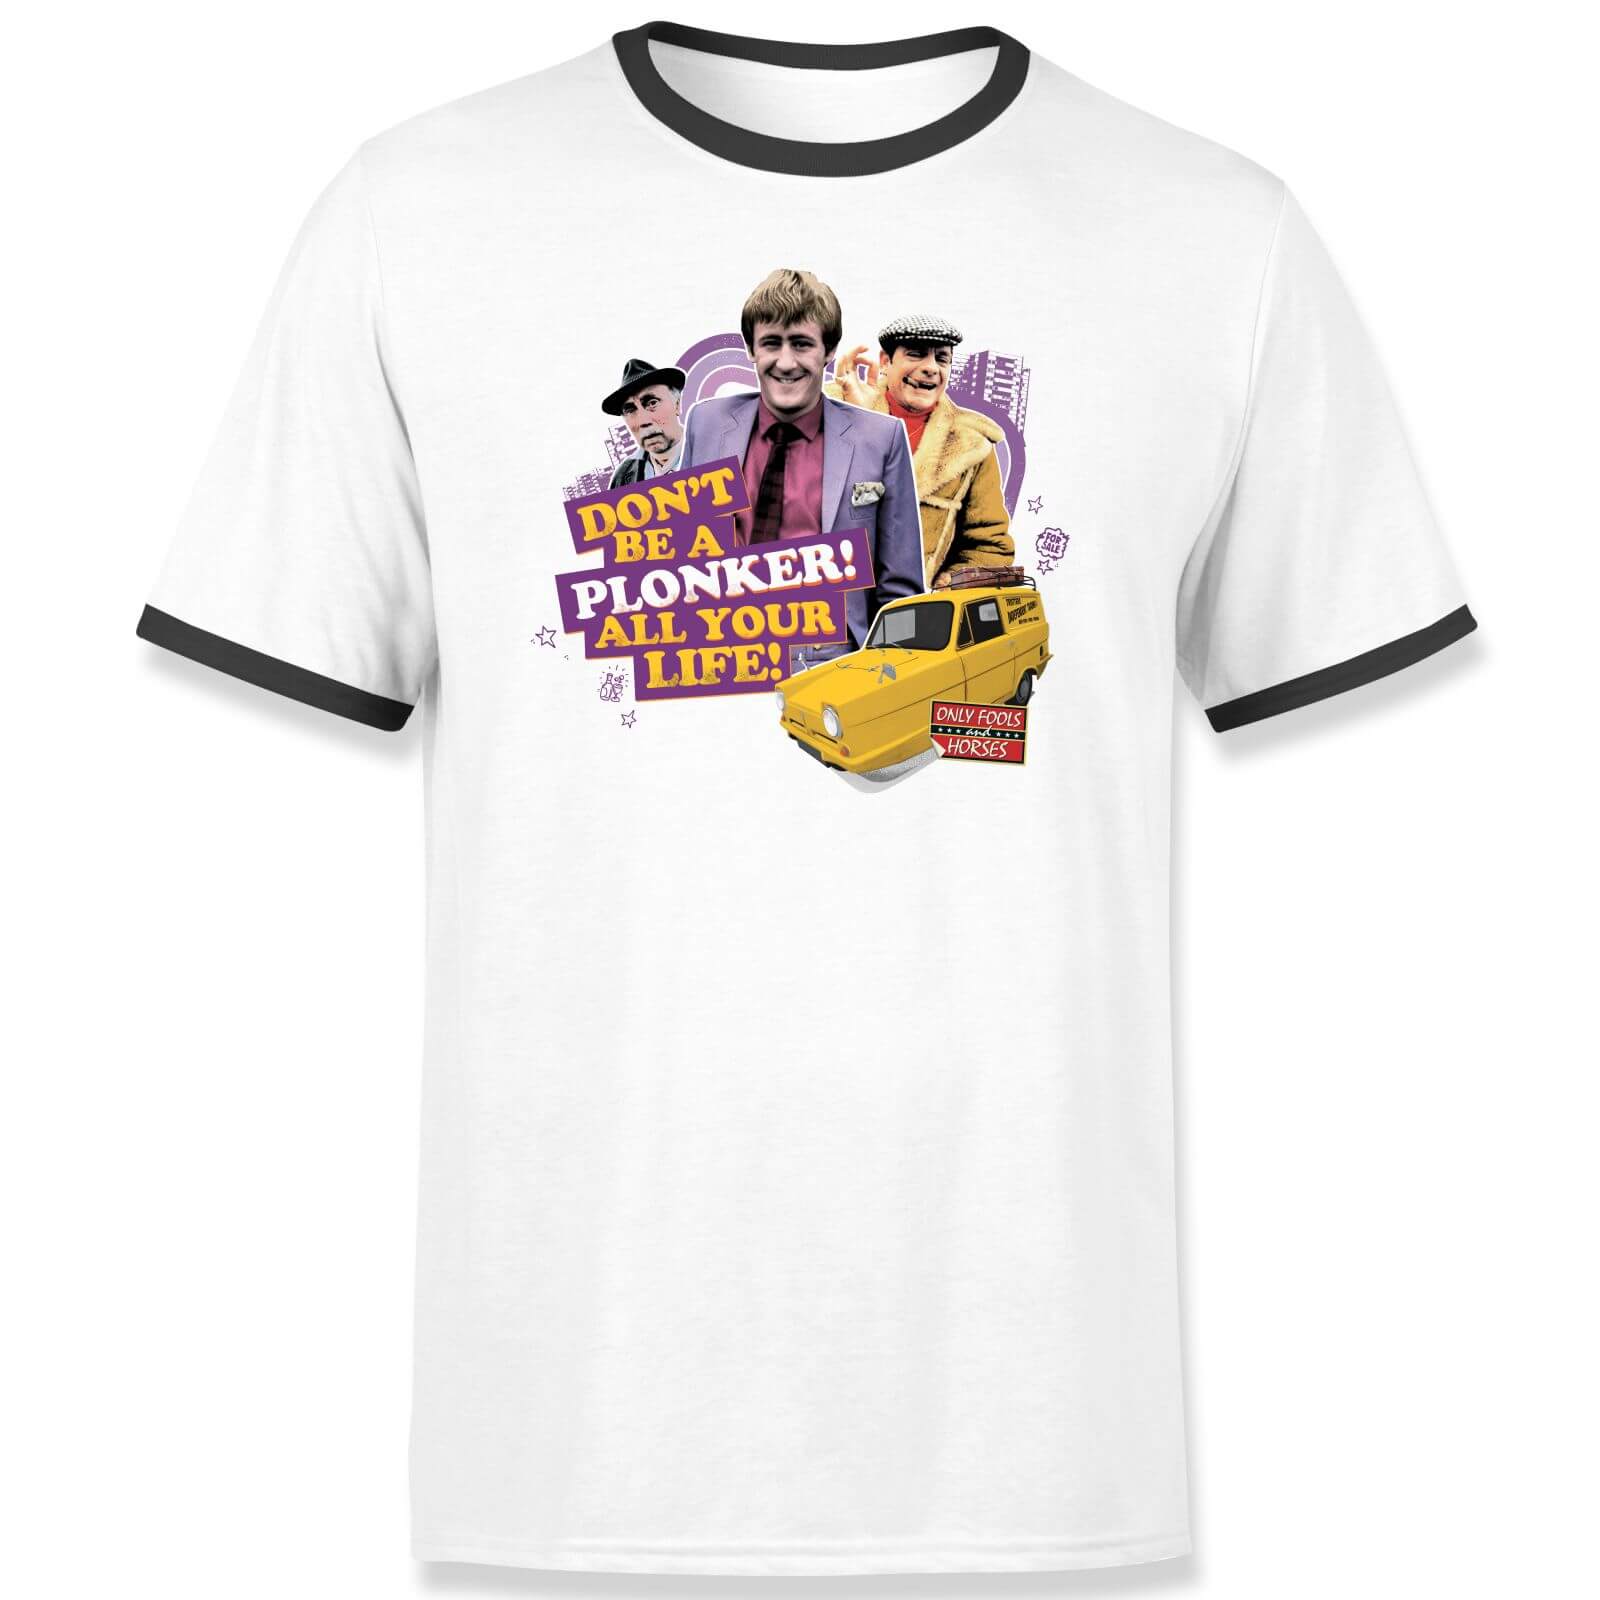 Only Fools And Horses Don't Be A Plonker! All Your Life! Unisex Ringer T-Shirt - White/Black - XS